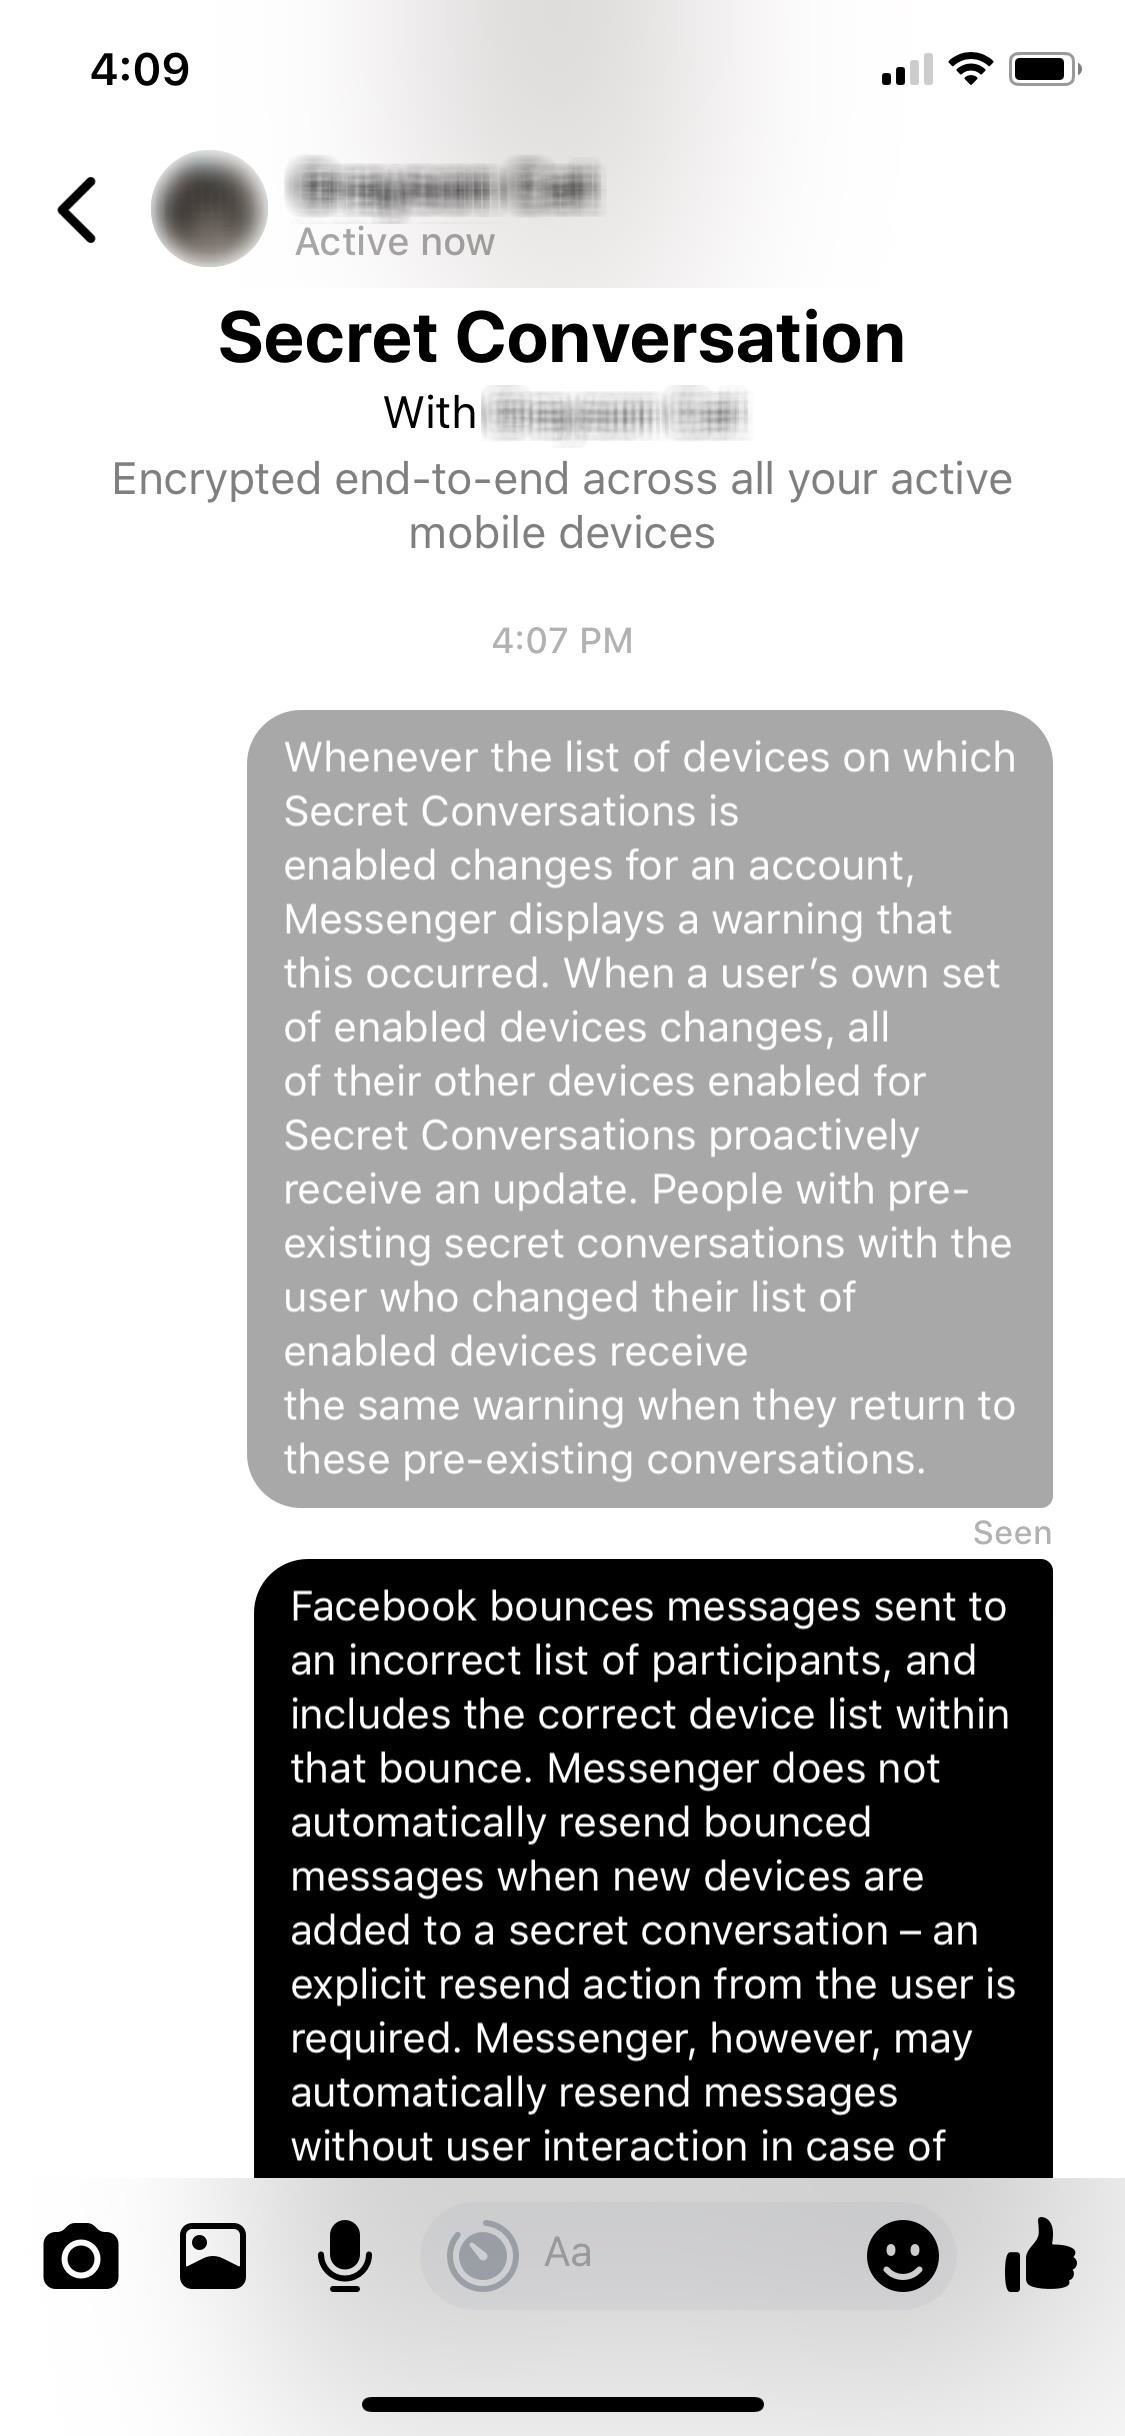 How to Chat with End-to-End Encryption Using Facebook Messenger's Secret Conversations